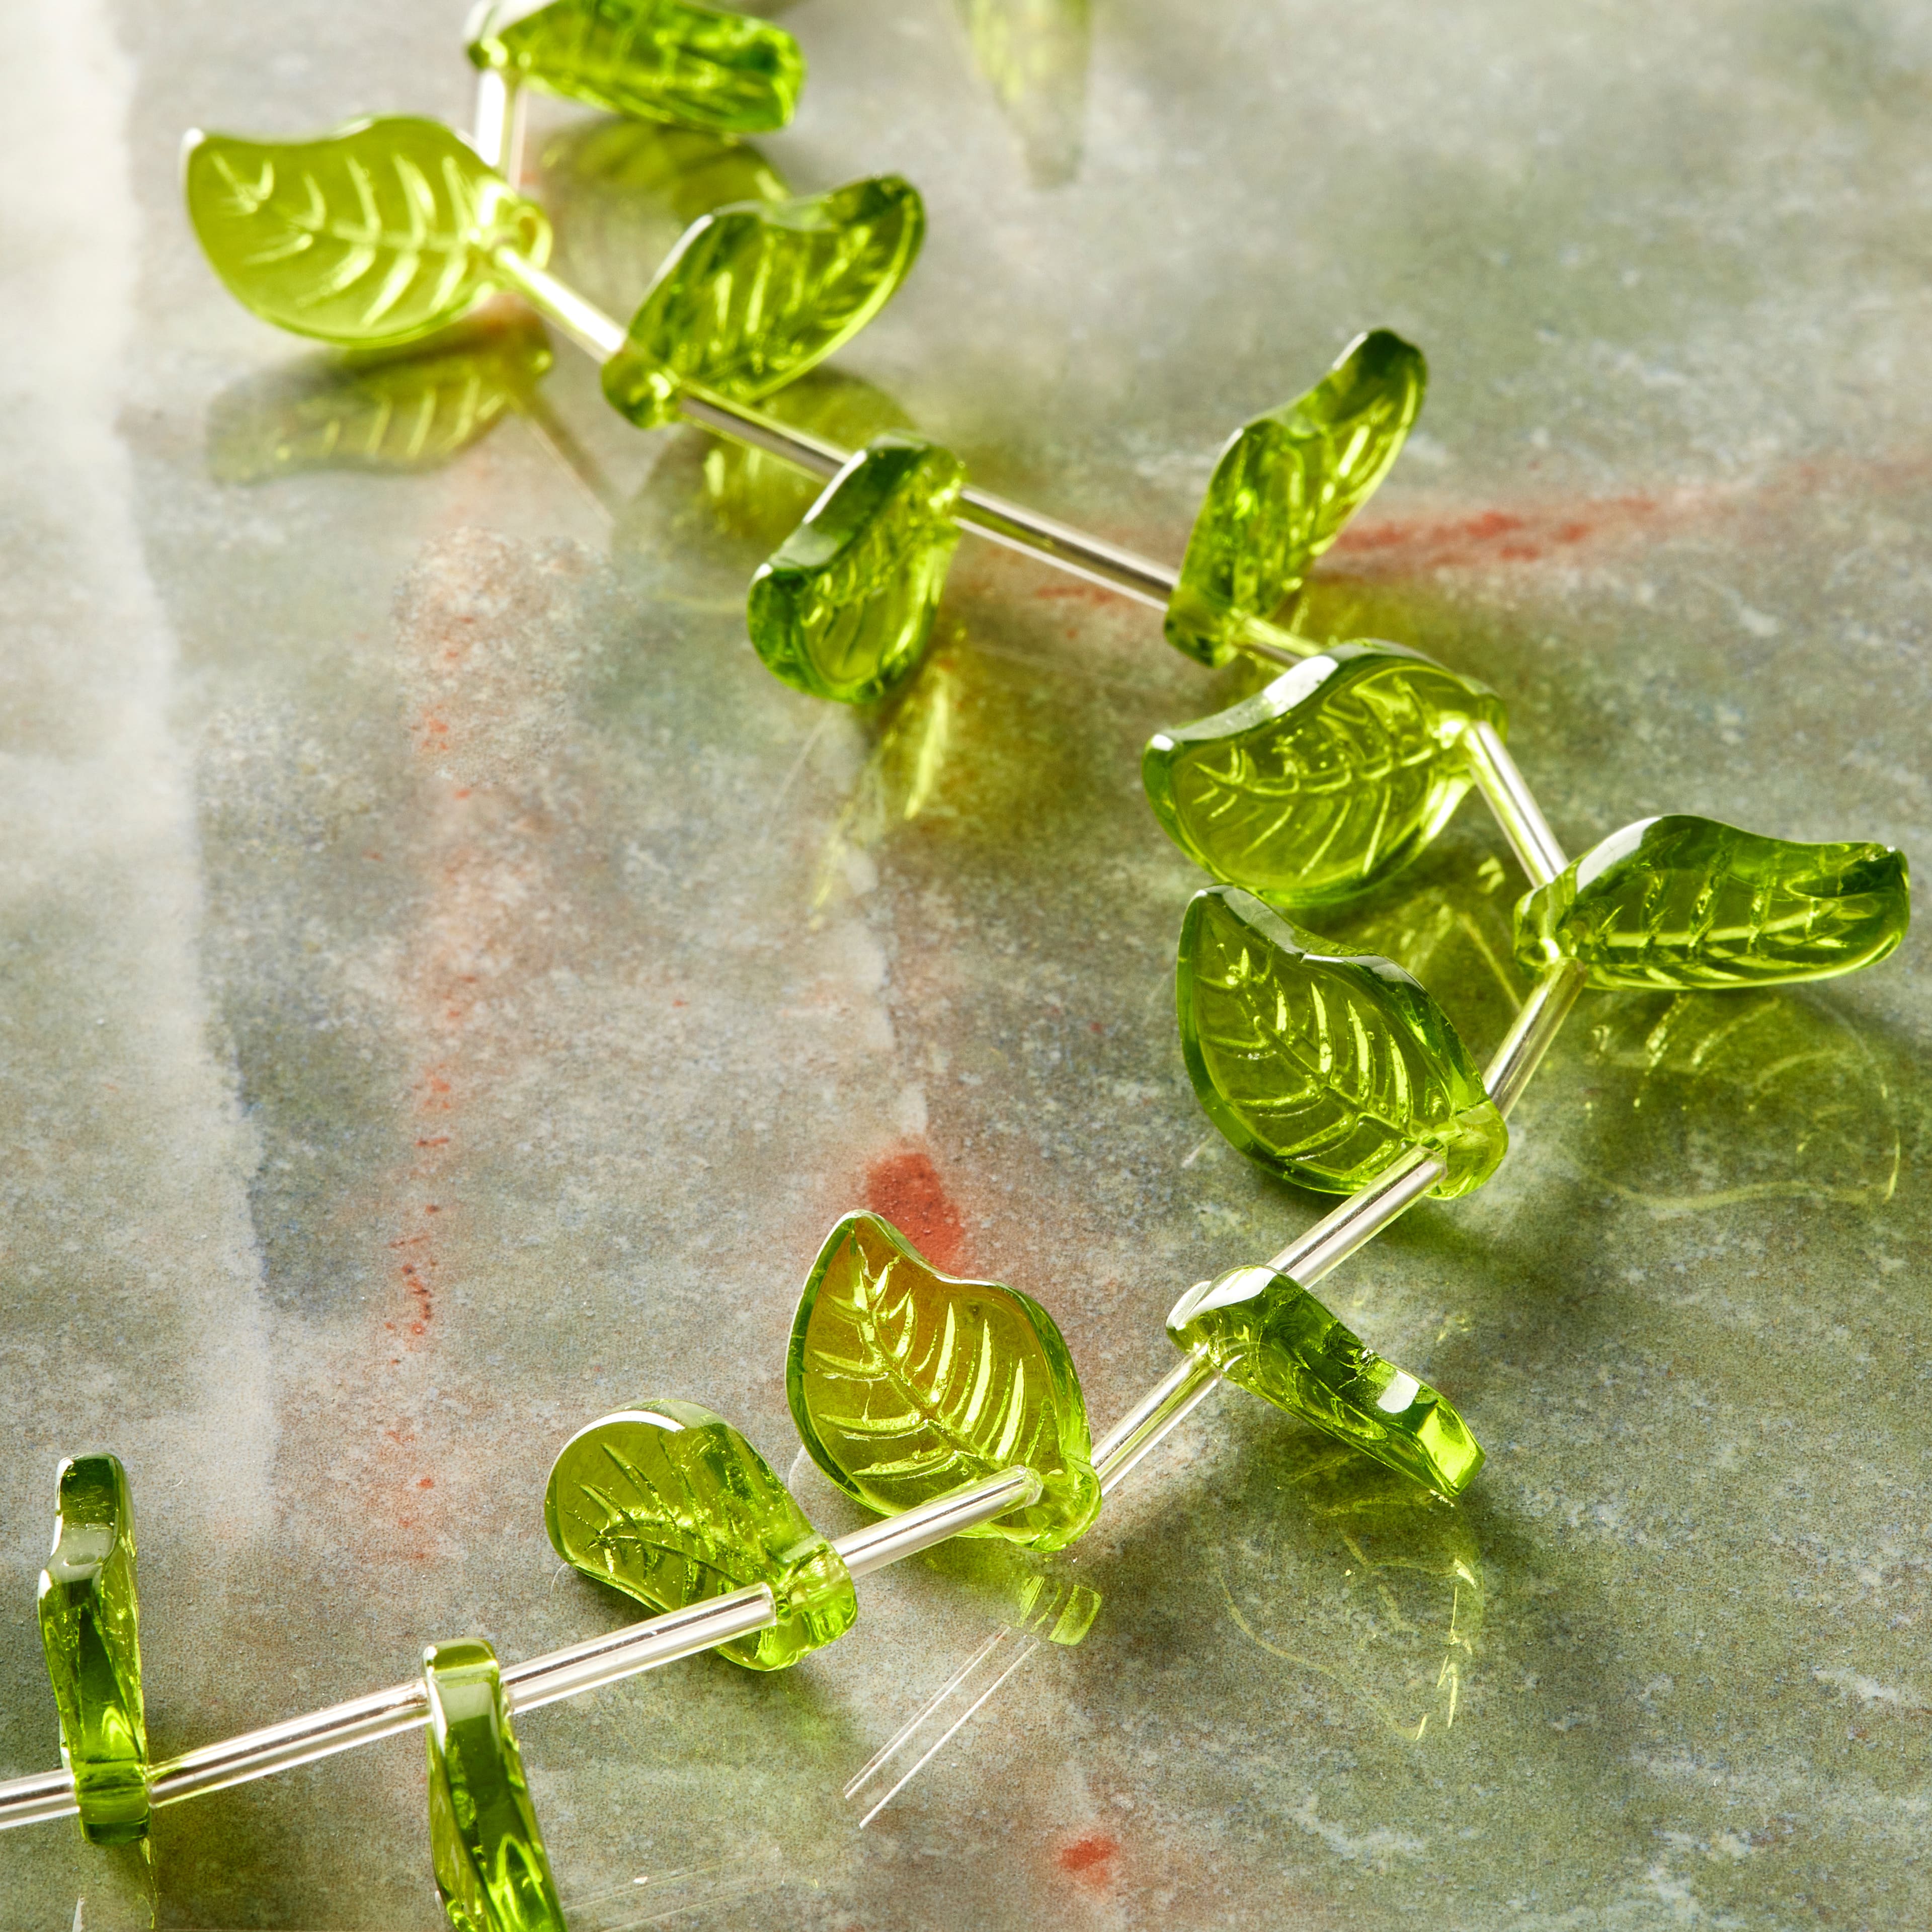 Leaf Beads 50 Pk Translucent Acrylic Green Tree Leaves Bead for